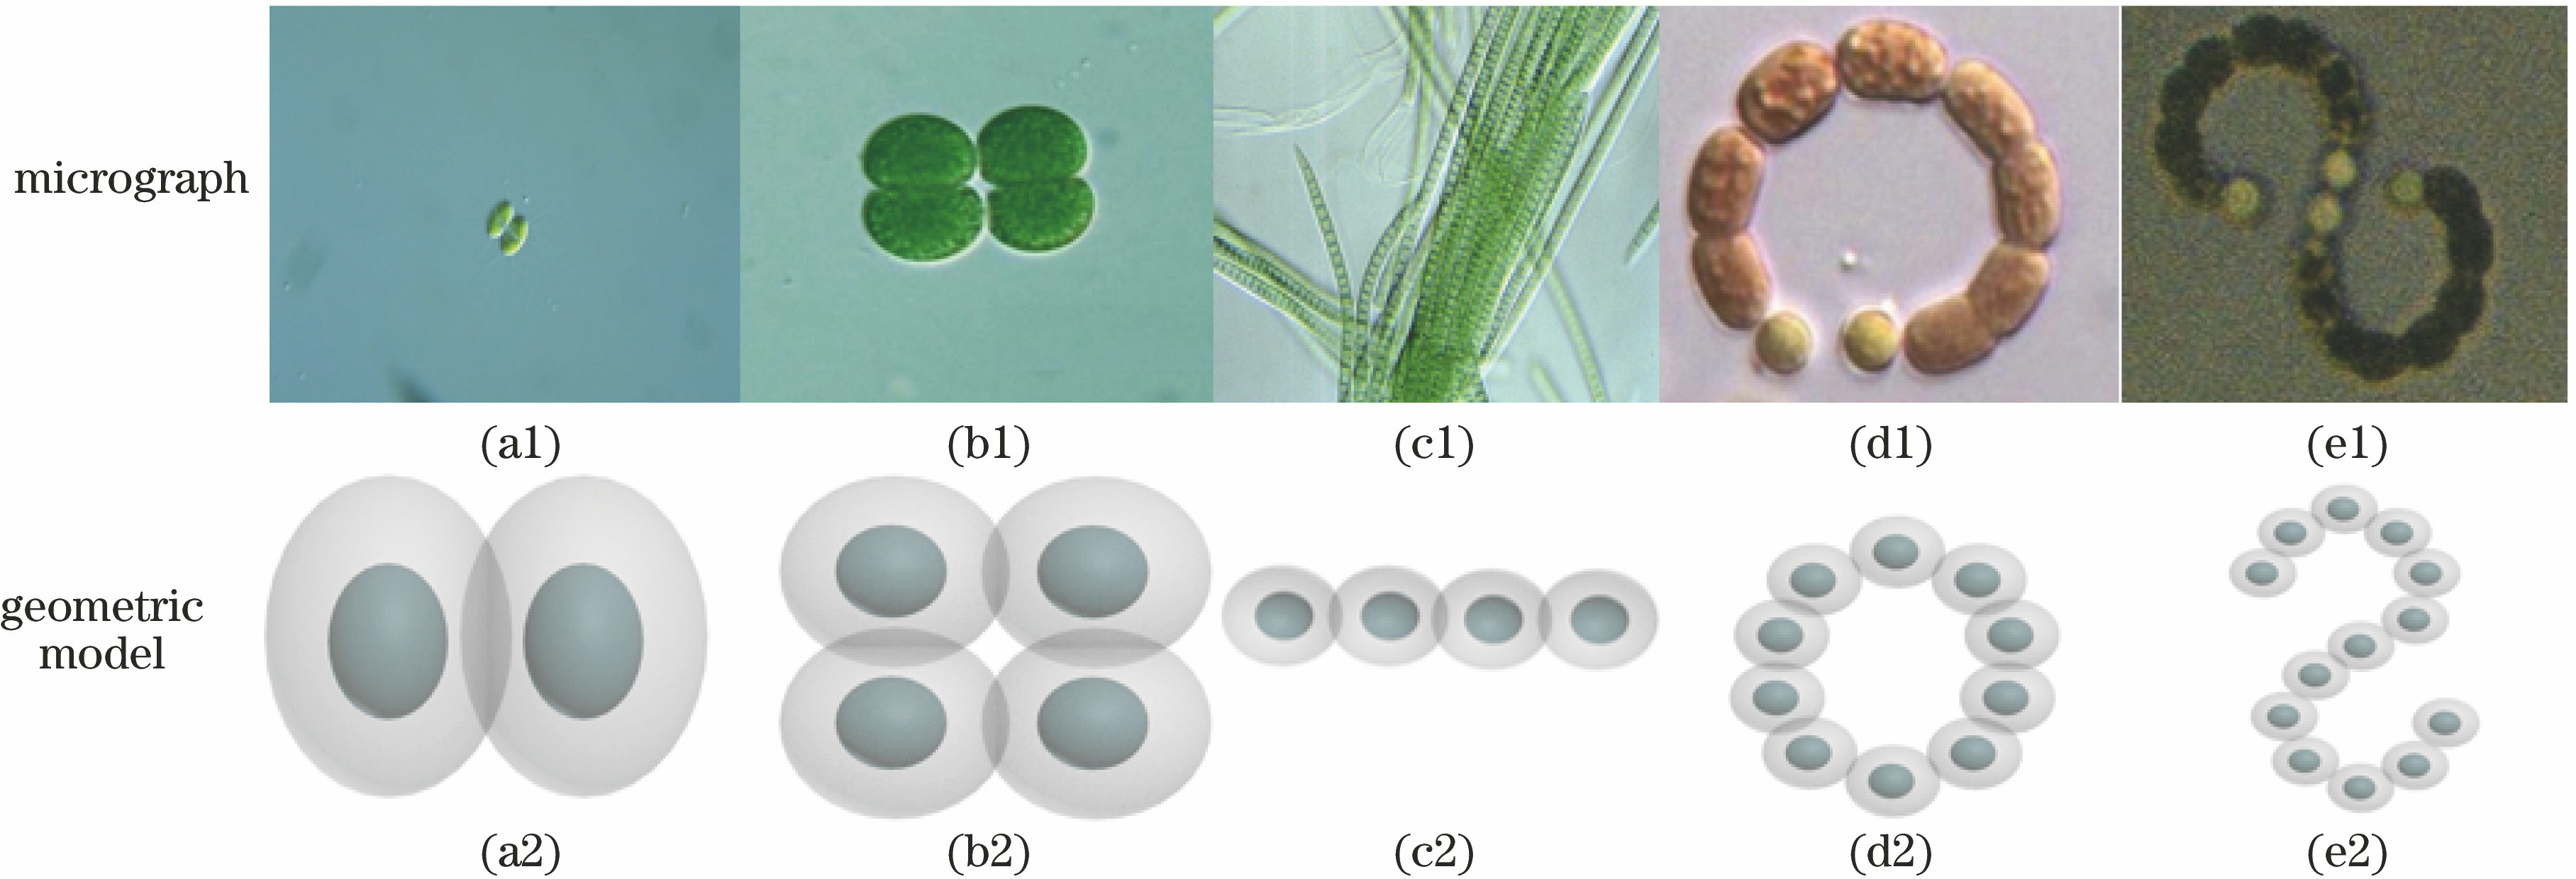 Micrographs and geometric models of several common cyanobacteria. (a1)(a2) Binuclear shell cyanobacteria particle aggregation; (b1)(b2) tetra-core shell cyanobacteria particle aggregation; (c1)(c2) cylindrical filamentous nuclear shell cyanobacteria particle aggregation; (d1)(d2) ring-shaped filamentous nuclear shell cyanobacteria particle aggregation; (e1)(e2) S-shaped filamentous nuclear shell cyanobacteria particle aggregation